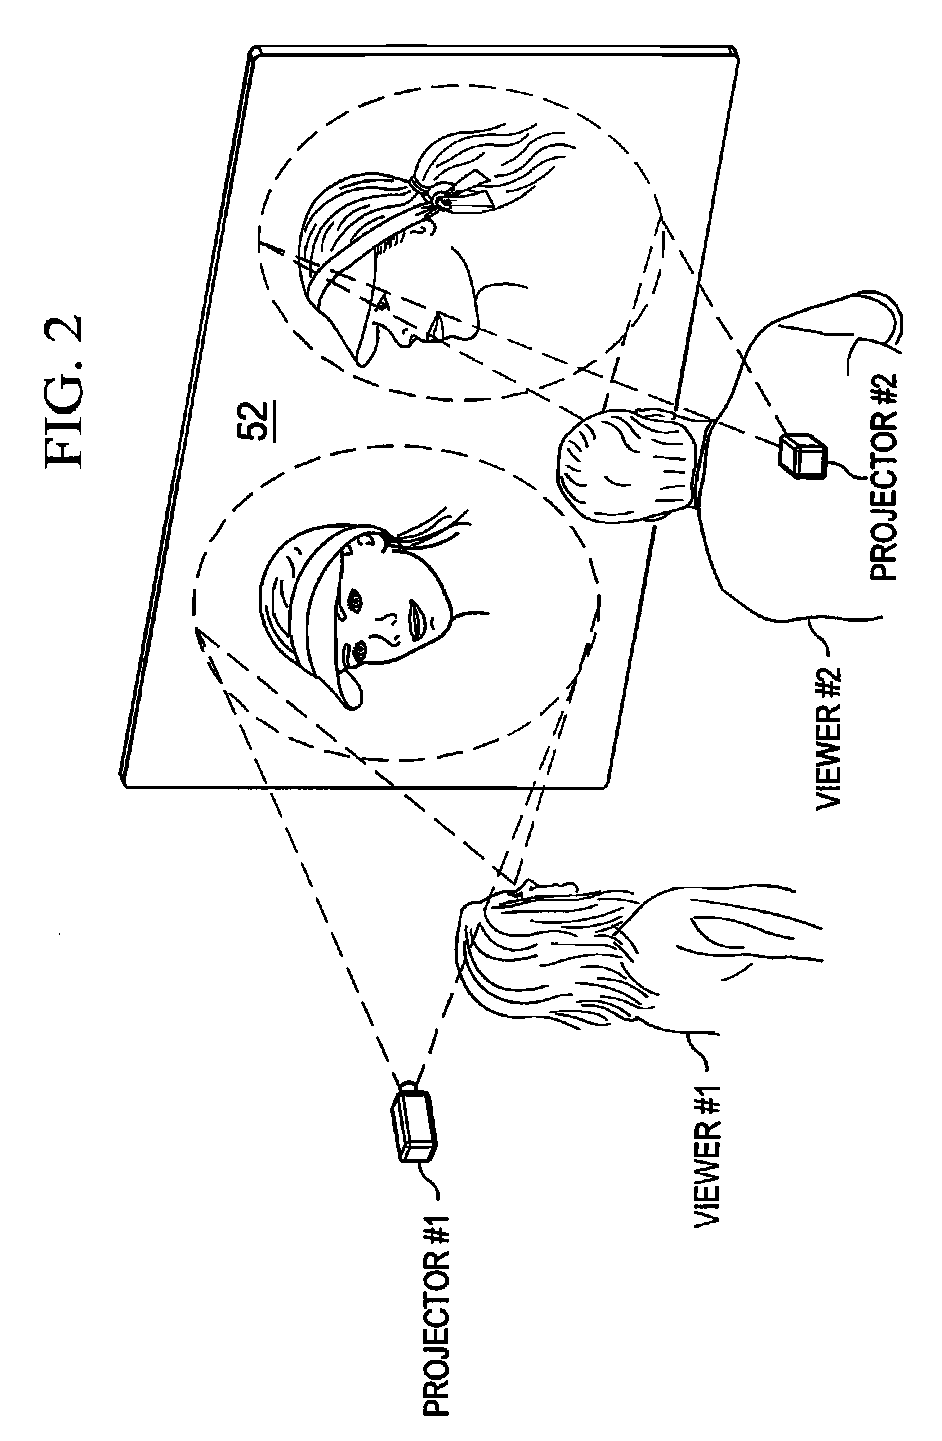 System and method for providing three dimensional imaging in a network environment